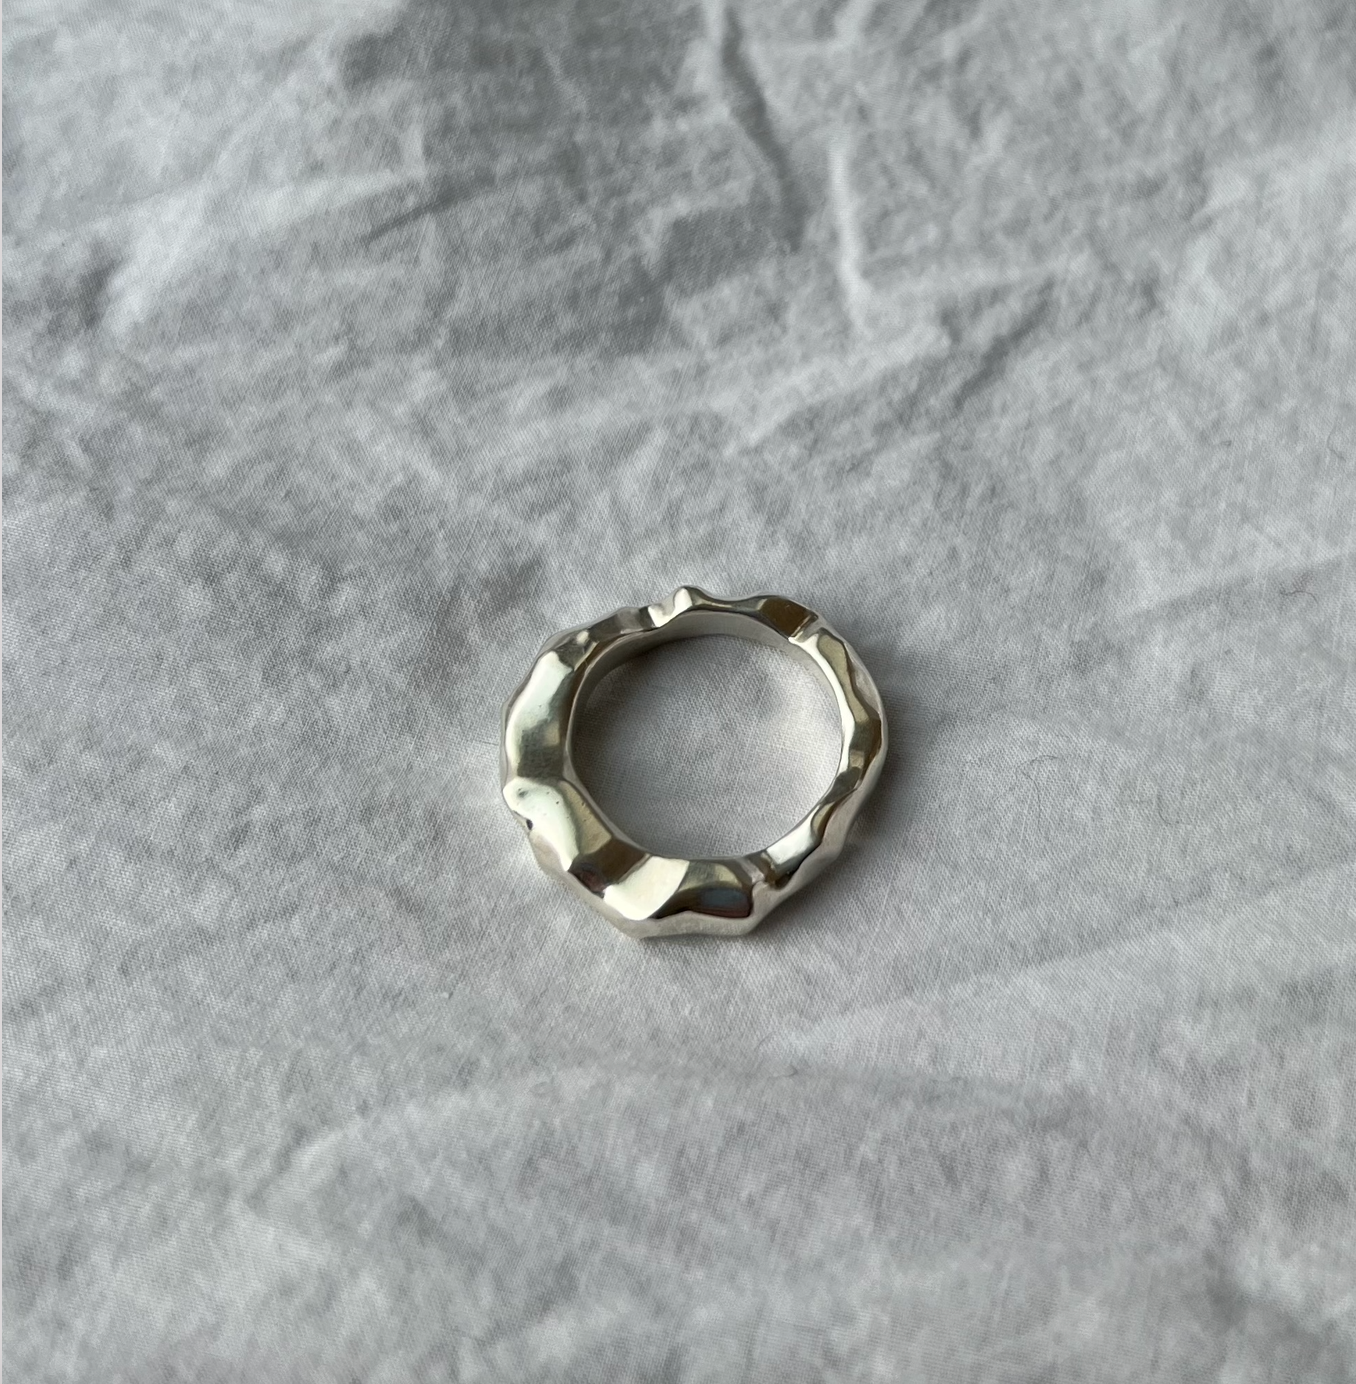 The Crinkle ring